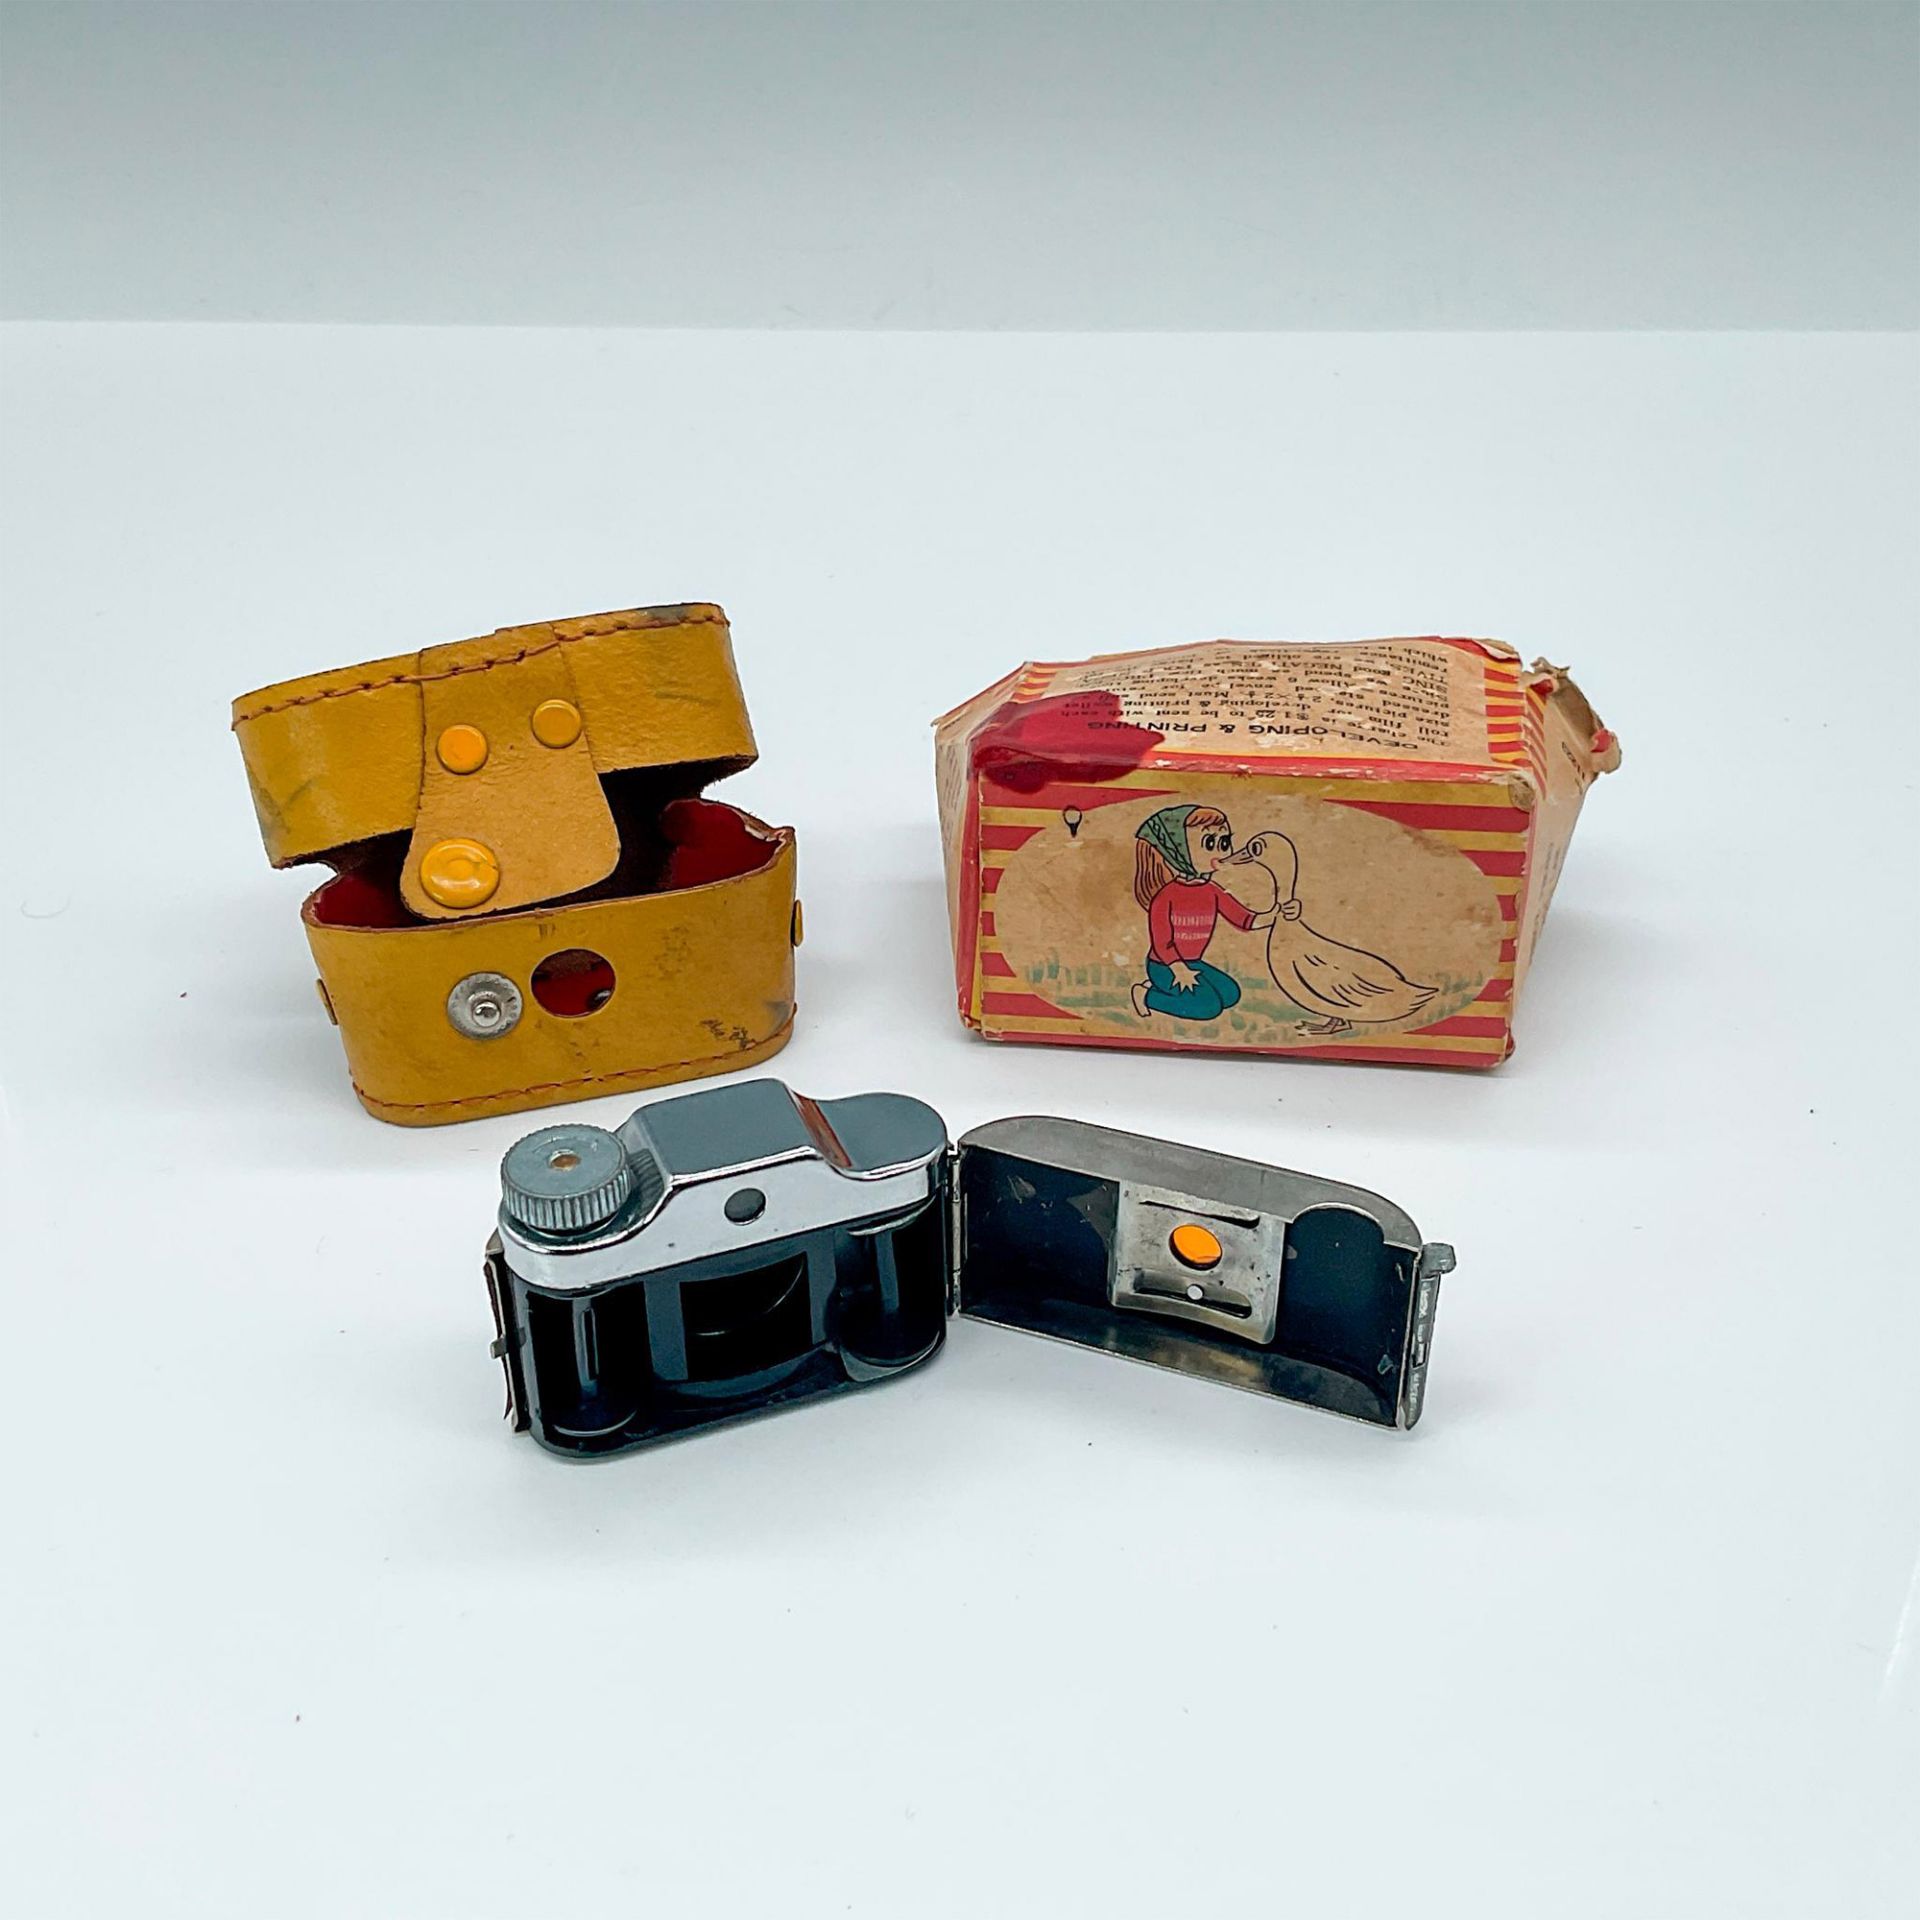 Vintage Japanese Crystar Subminiature Camera with Case - Image 3 of 3